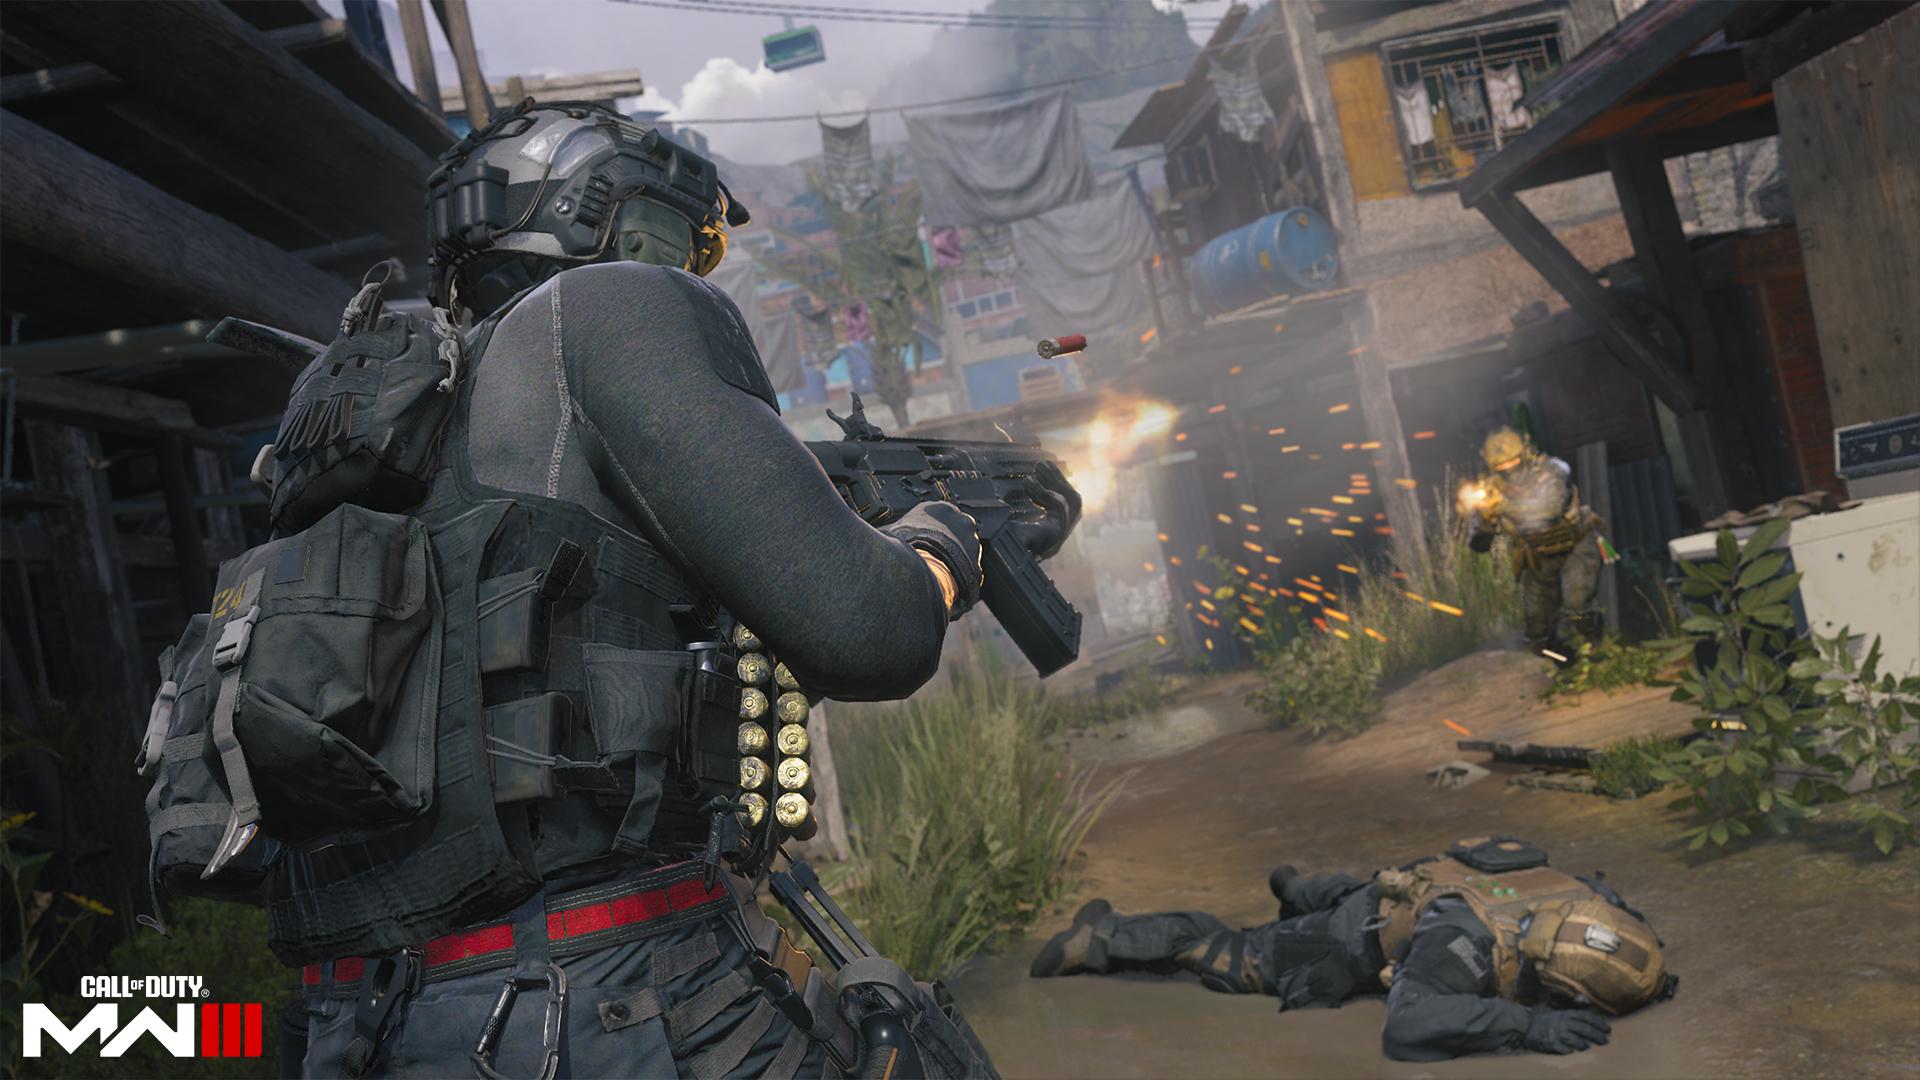 Call of Duty: Modern Warfare 3 details revealed, including 16